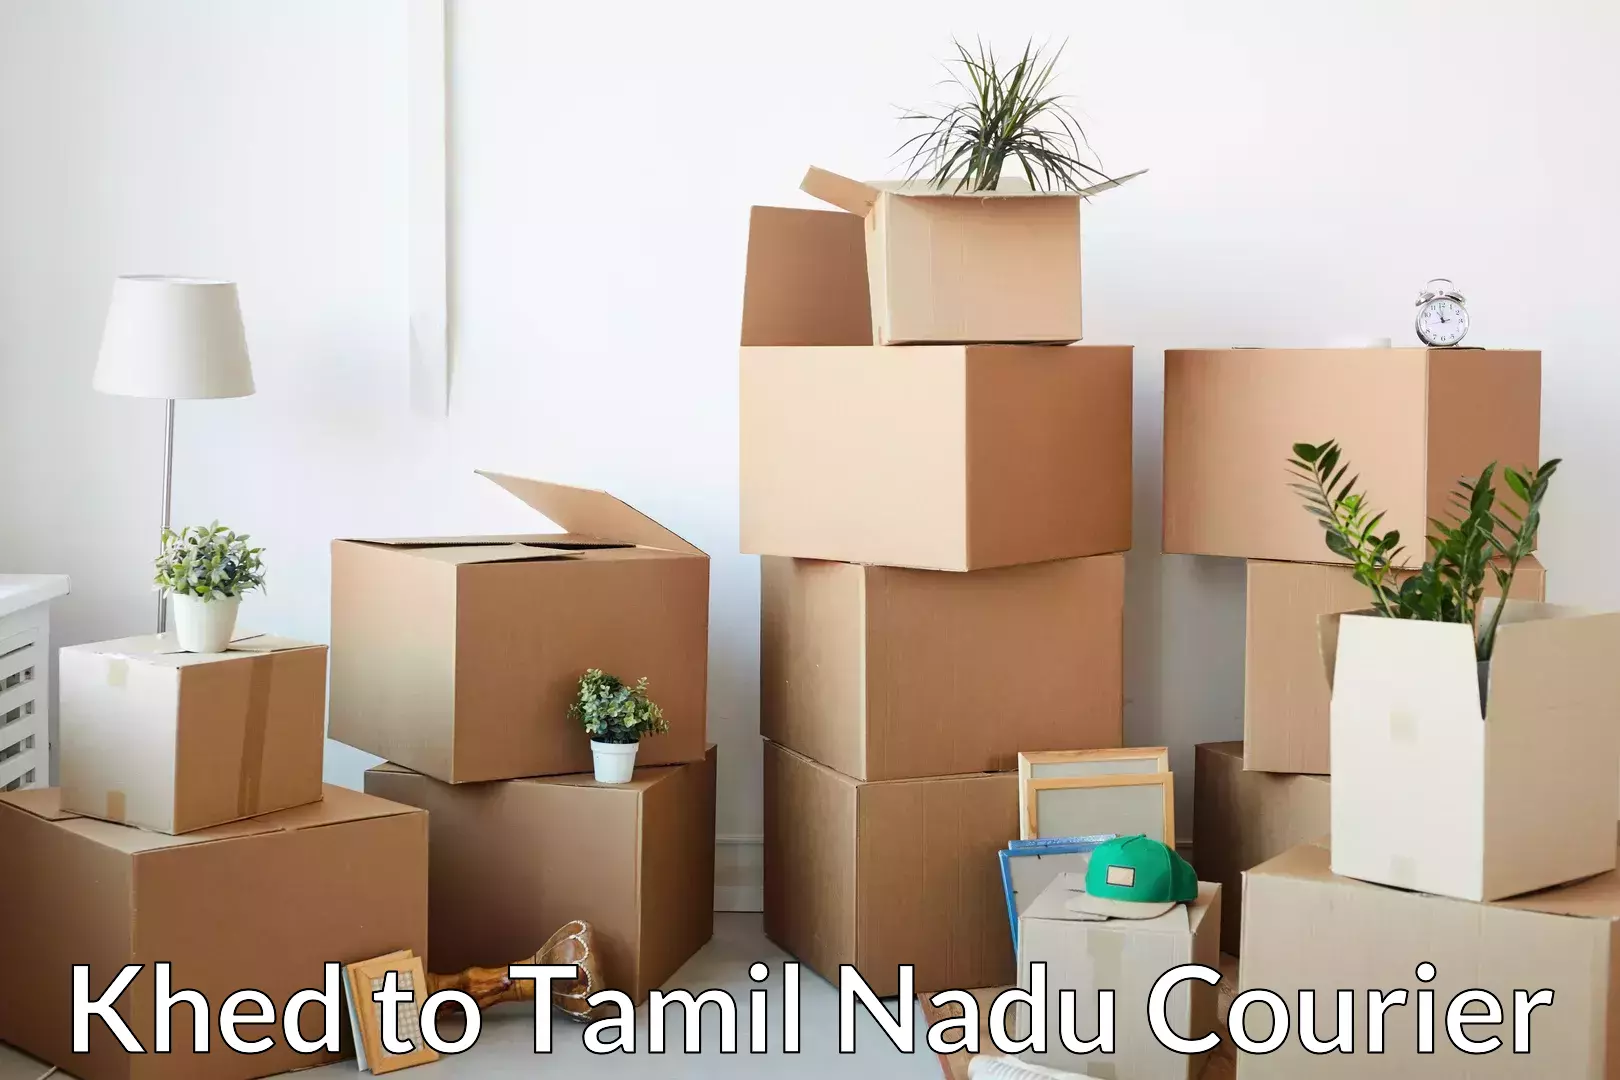 Household goods transport service in Khed to Tamil Nadu